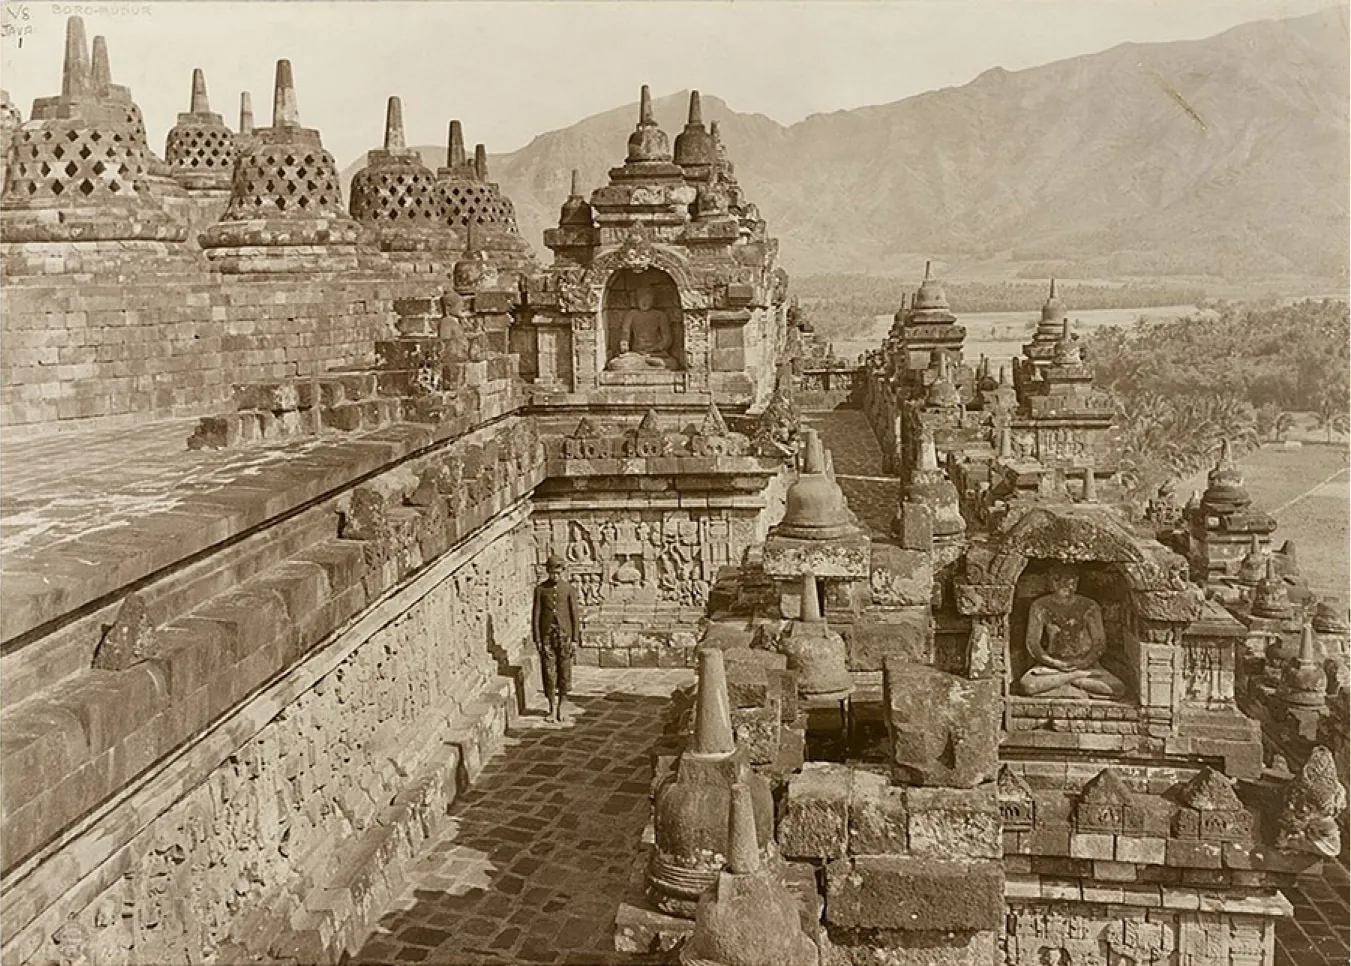 An image of a sepia colored photograph is shown. The far right background shows tall mountains and areas of trees, water, and flat grassy areas show in front of the mountains on the right of the image. At the top left, eight mound-like structures (stupas) are shown sitting atop square bricked pedestals at varying levels. A thin vertical spire shows at the top and four rows of diamond shaped perforated openings line the mound. To the right, more solid stupas line the top of a structure with an arc shaped opening with a sitting statue inside. The archway is decorated with carvings. To the left of the structure on the same level as the stupas, a broken wall of bricks shows with the head of a statue showing. The next level down shows an uneven bricked walkway that extends out to the back of the massive structure. Lighter colored walls run along the walkway made of bricks and carvings show within those bricks. A figure stands along this wall under the sitting statue above in a dark buttoned jacket and pants that stop below the knee. He wears a dark cap and looks down. To the right of the walkway in the forefront, another sitting statue in an arched opening sits with legs crossed and hands resting in his lap. The statue is very worn and the stones above the arch are broken and missing pieces. Another walkway sits to the lower right of this structure with walls running along with carvings as described earlier. Along the right side, walls run with solid stupas lining the tops of varying levels.